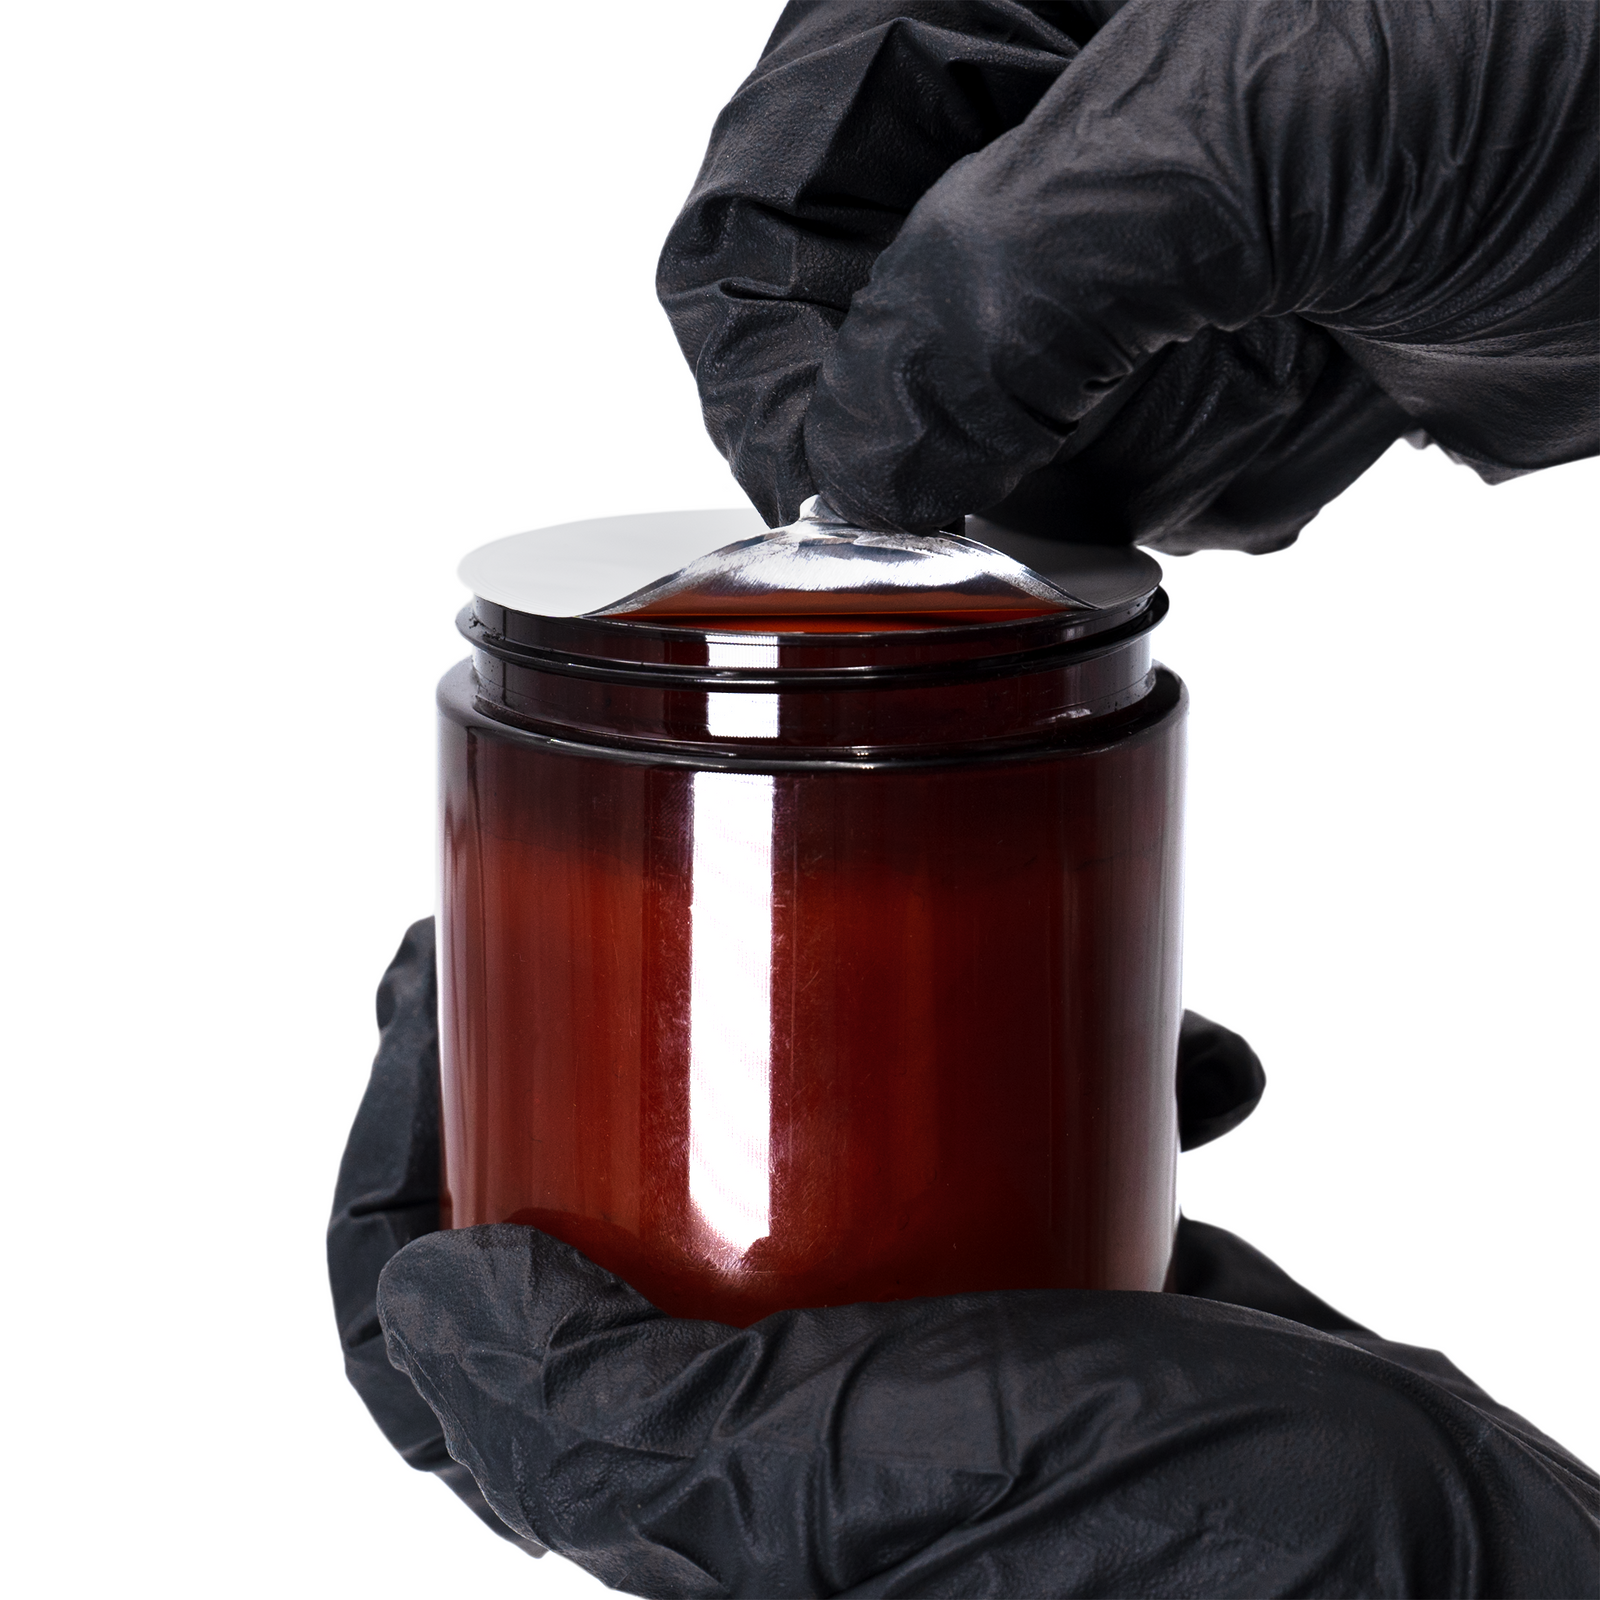 The hand of a person removing and induction sealer from a container